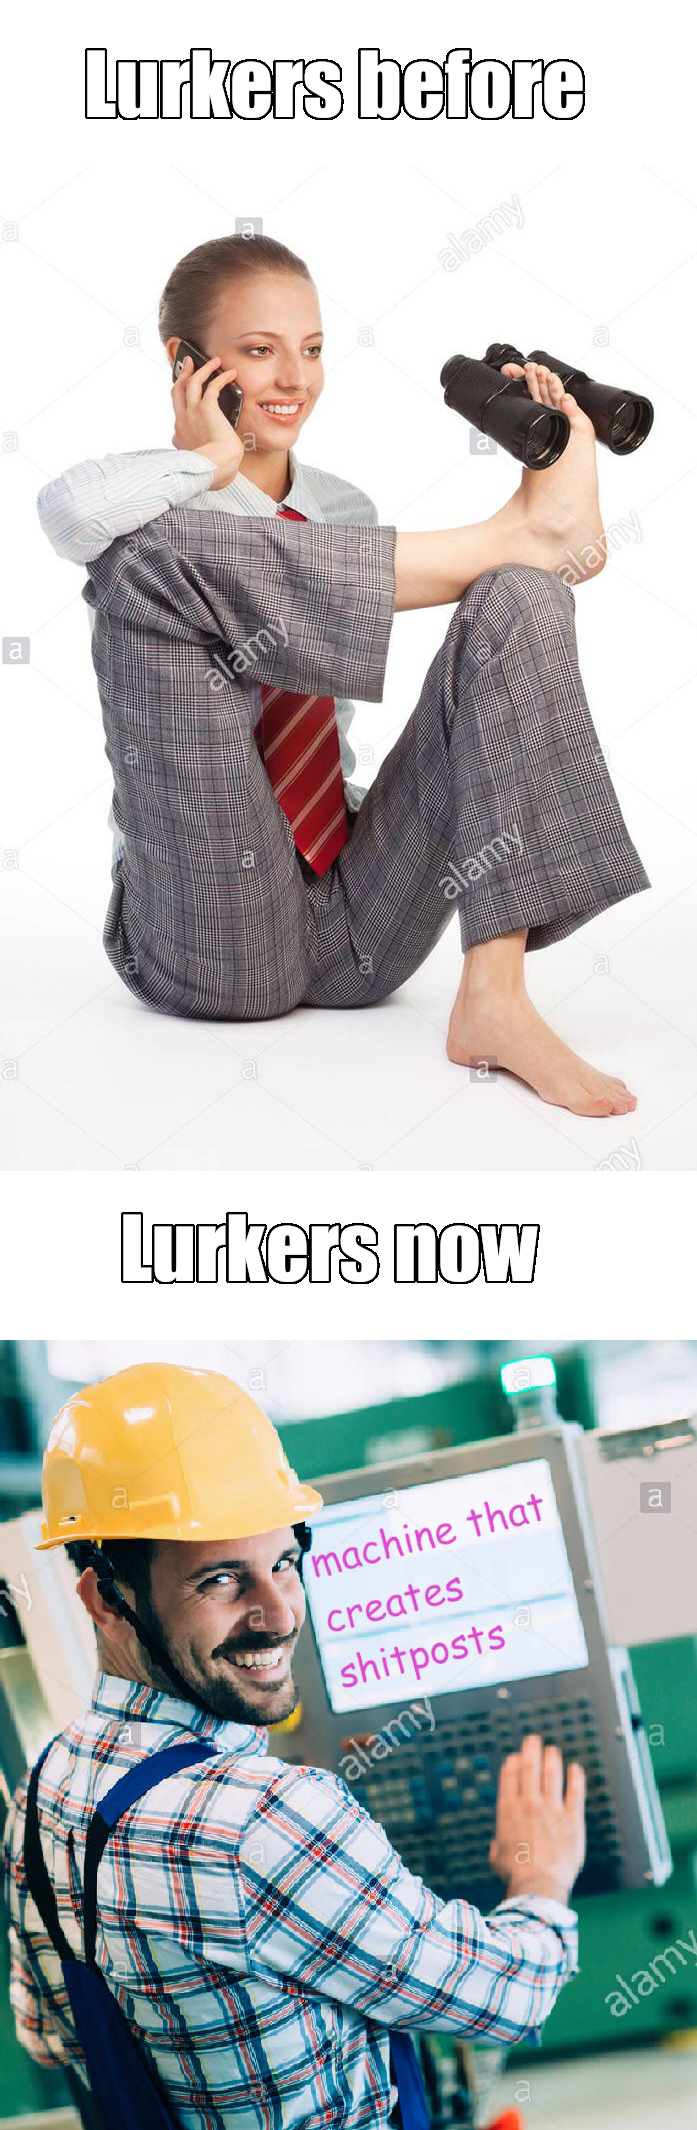 technically not lurkers anymore